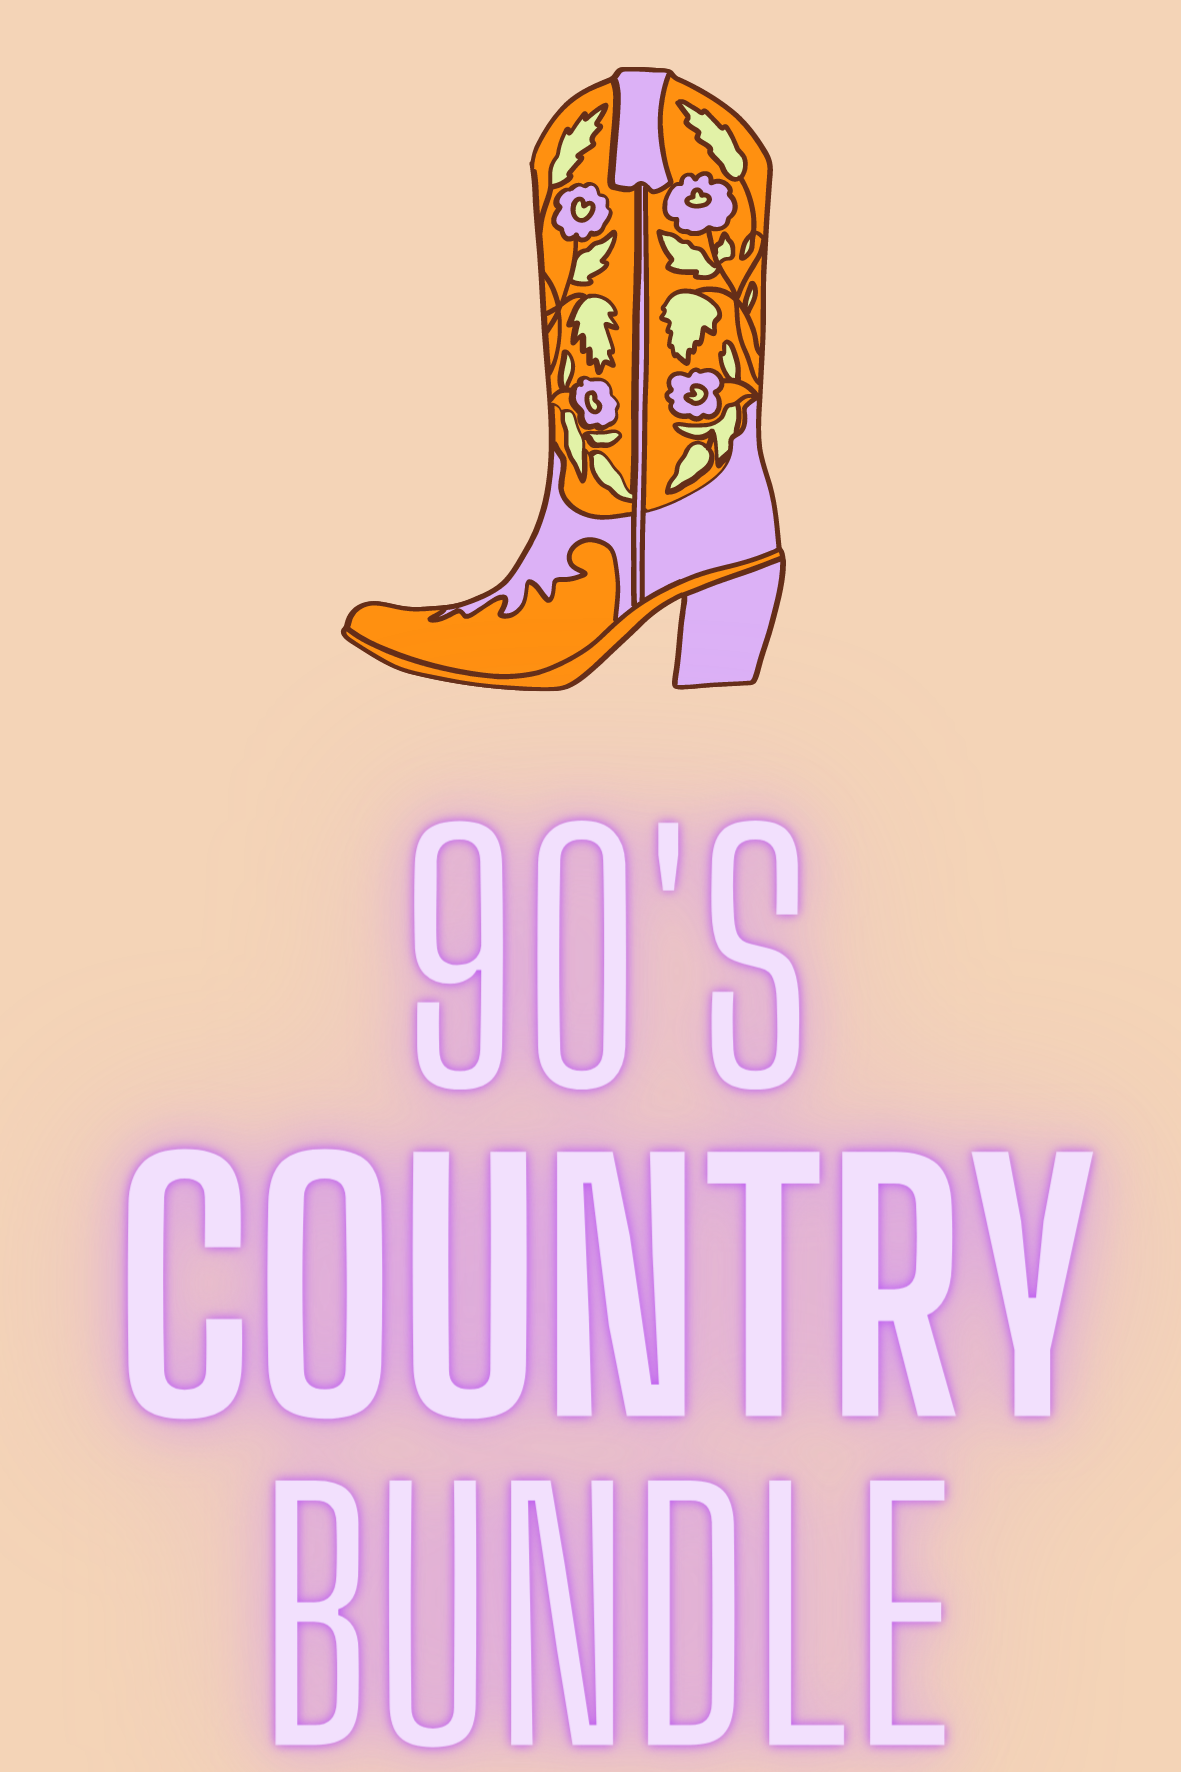 90's Country Bundle (Made to order)